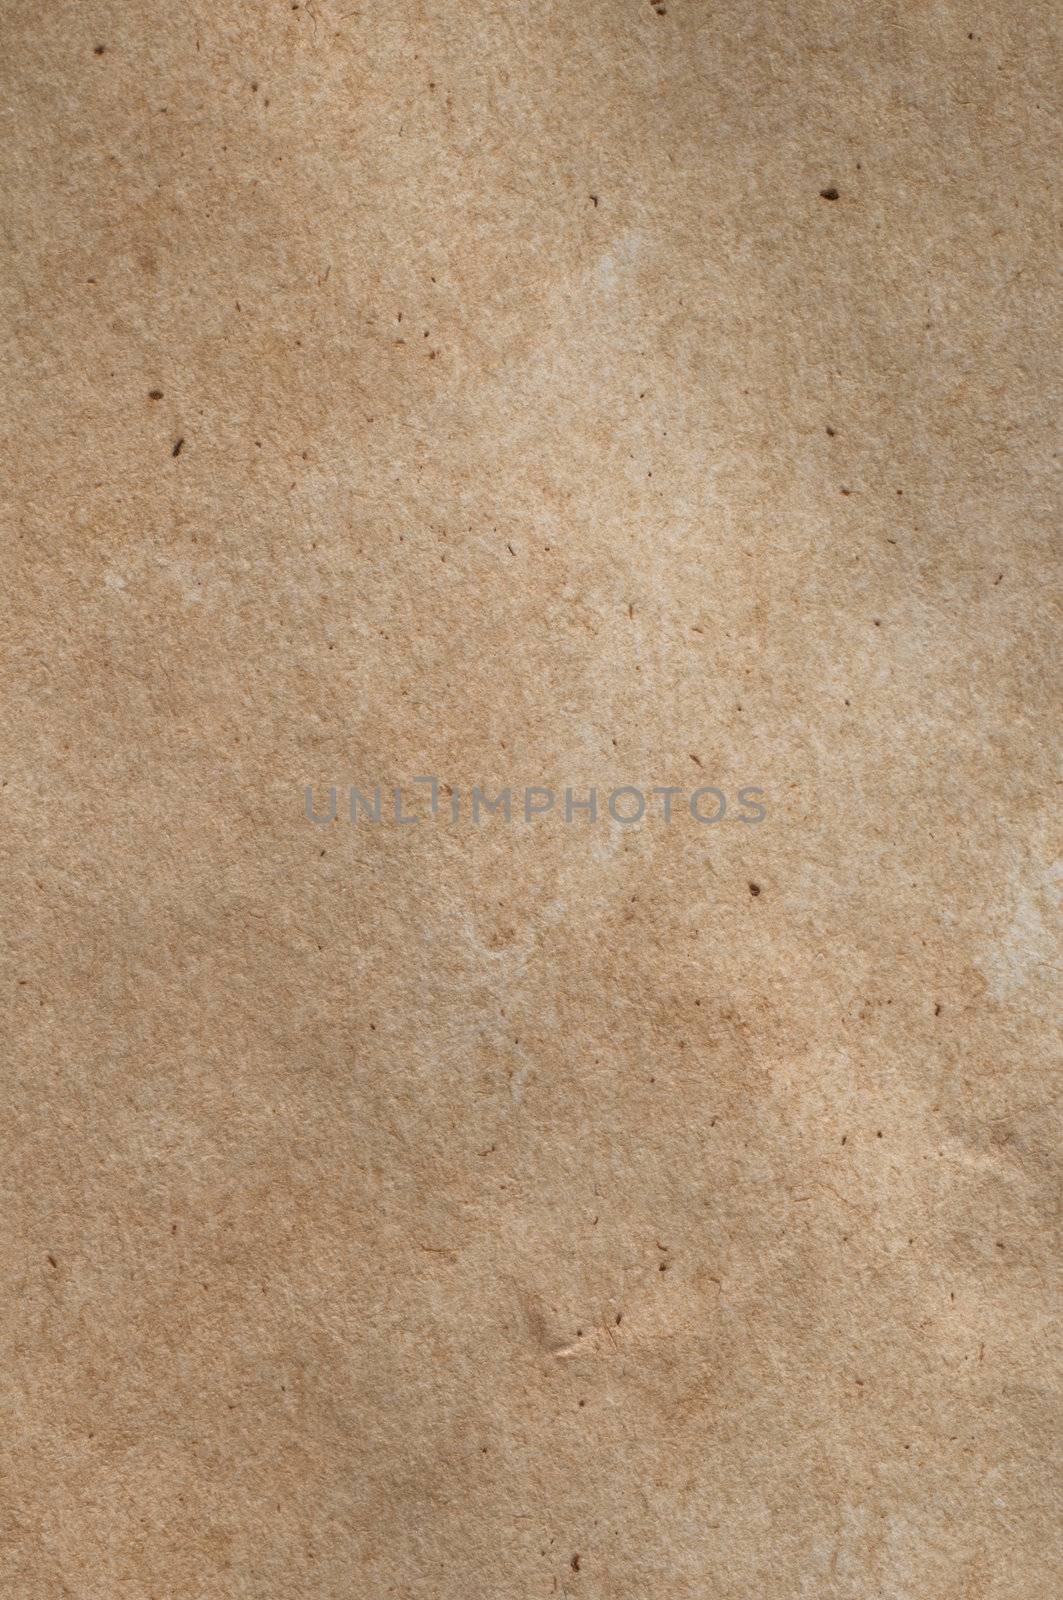 Textured Brown Paper Background by frannyanne